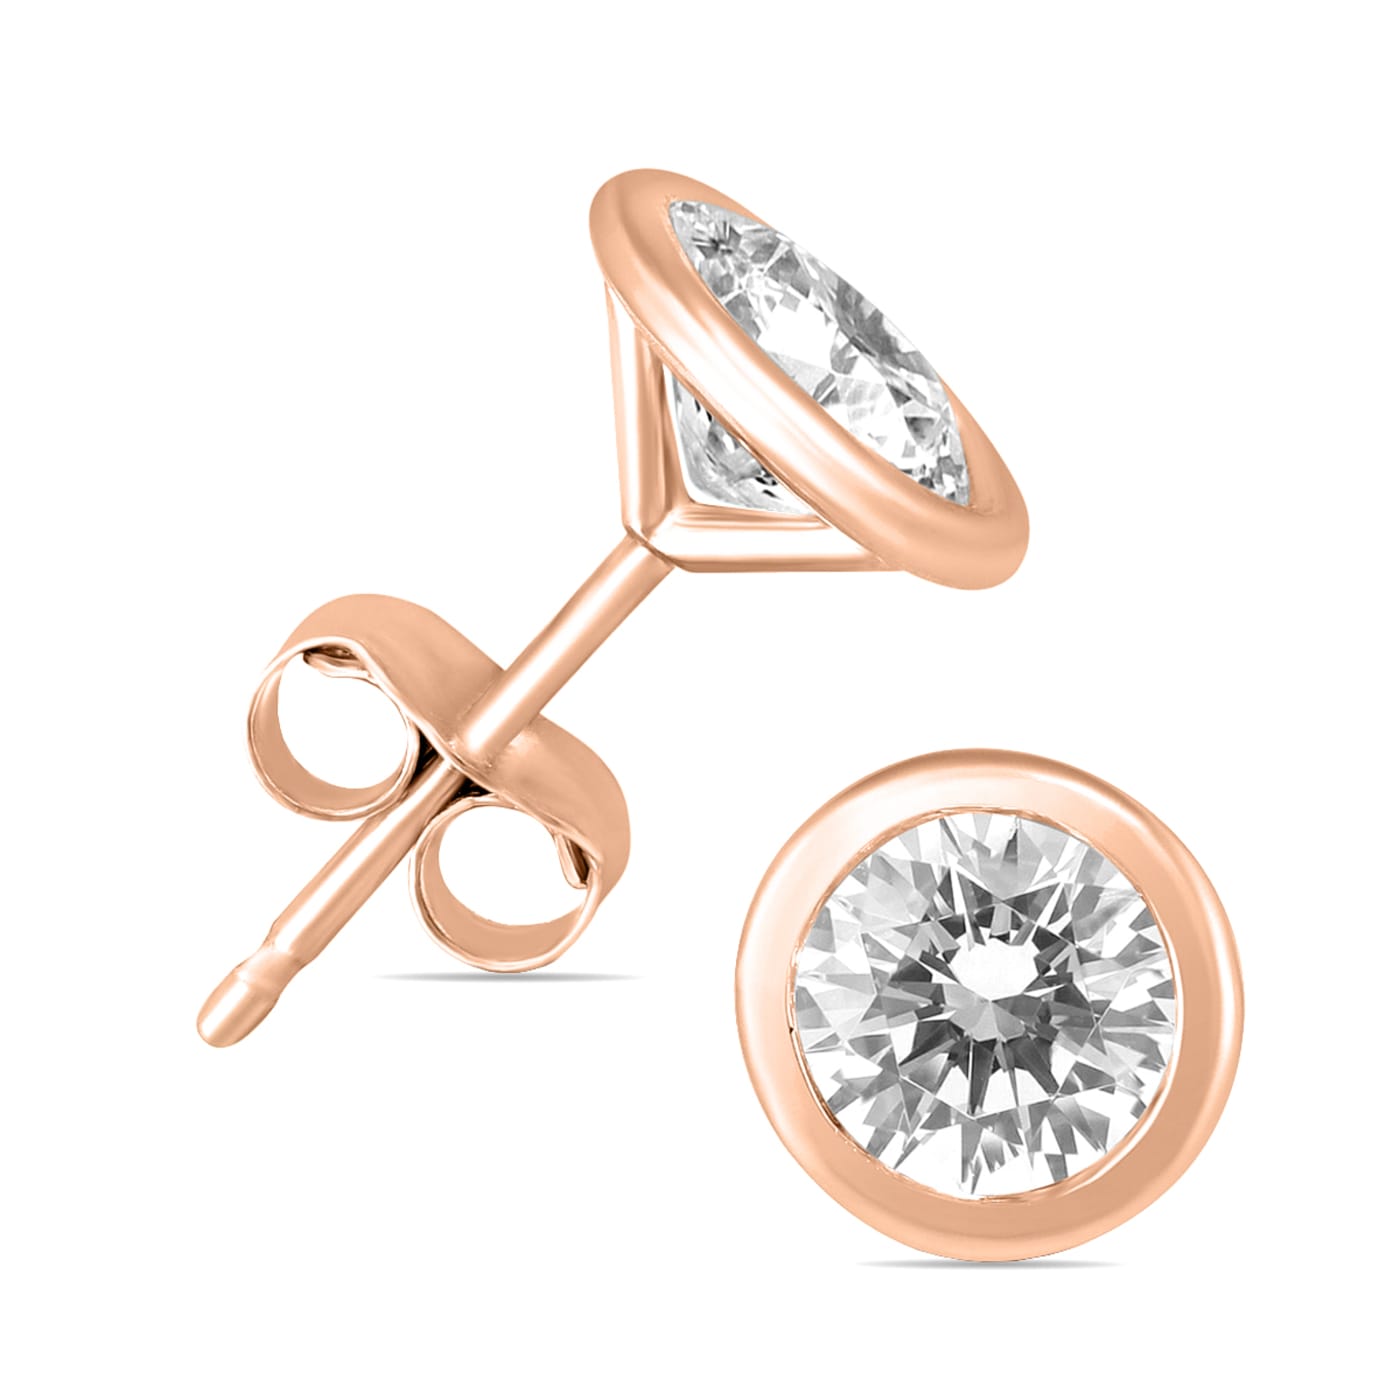 GIVA Sterling Silver Rose Gold Elliptic Stud Earrings for Womens and Girls  Buy GIVA Sterling Silver Rose Gold Elliptic Stud Earrings for Womens and  Girls Online at Best Price in India 